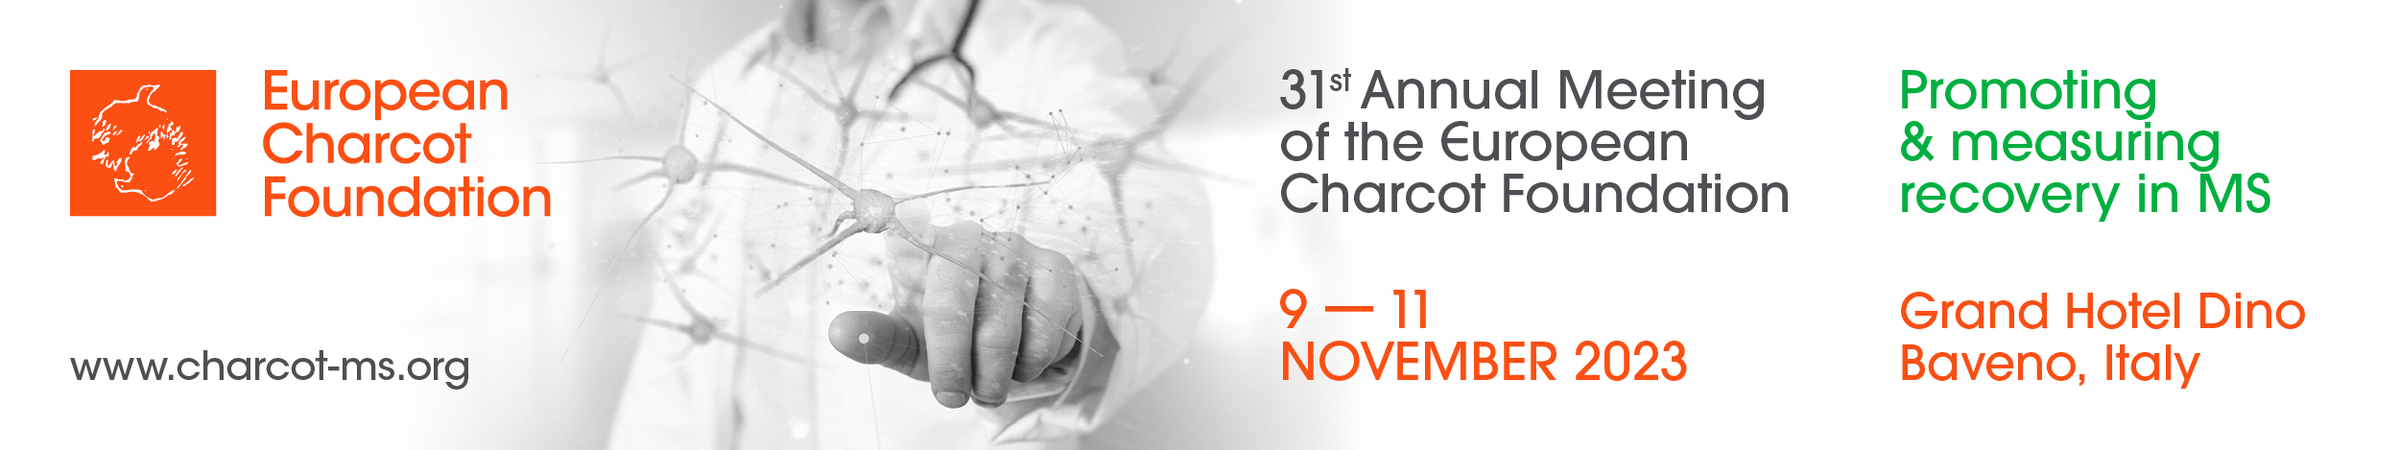 Hotel reservation - 31st Annual Meeting of the European Charcot Foundation, 9 - 11 November 2023, Baveno